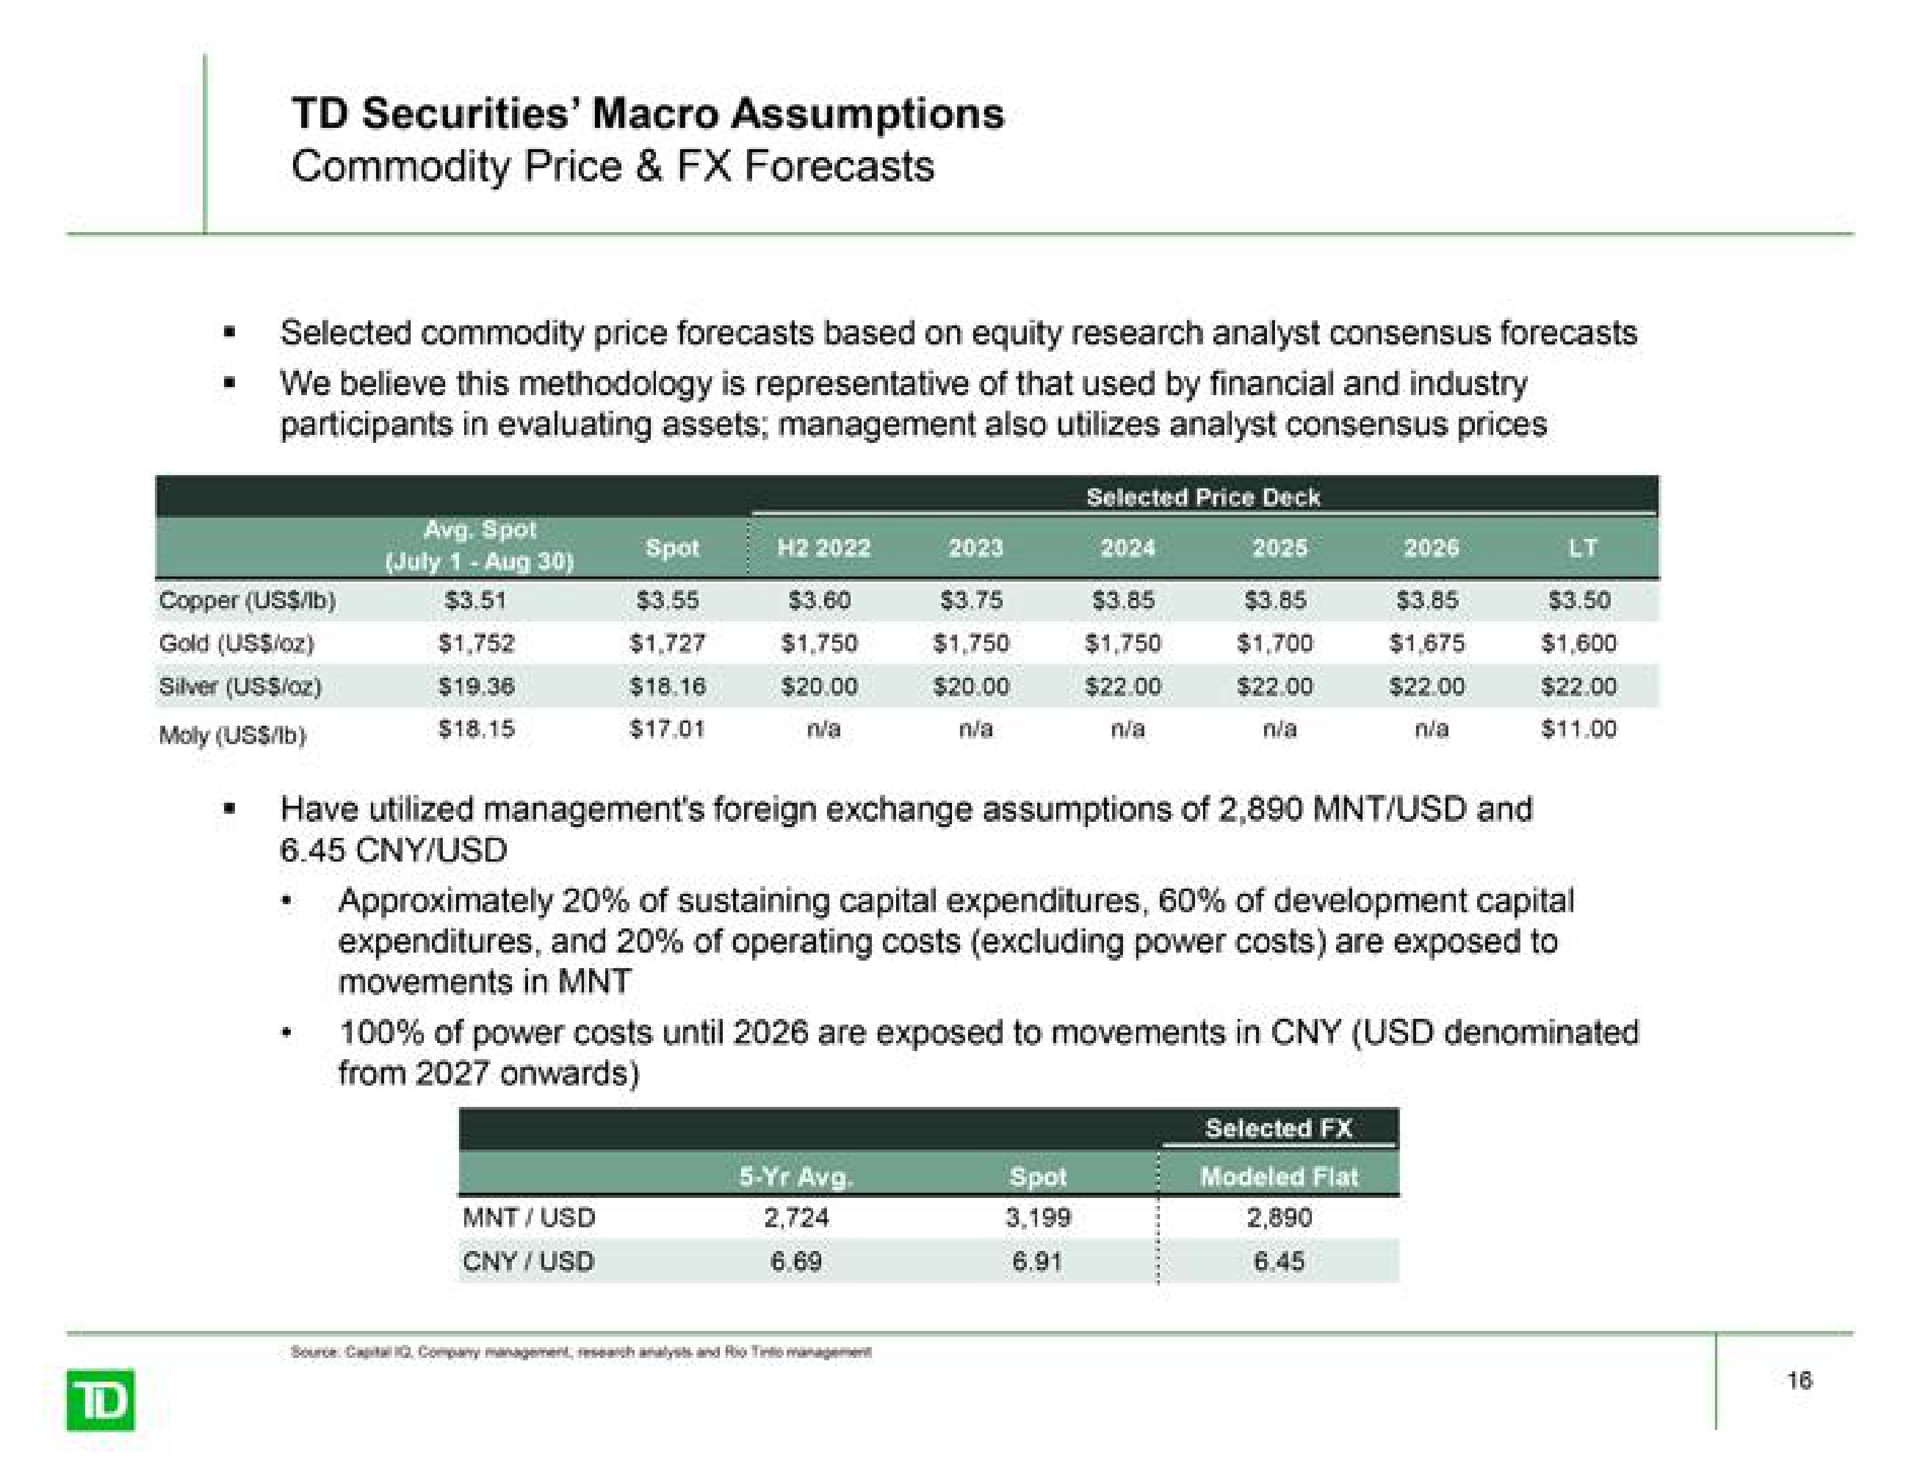 securities macro assumptions commodity price forecasts ava modeled fiat | TD Securities